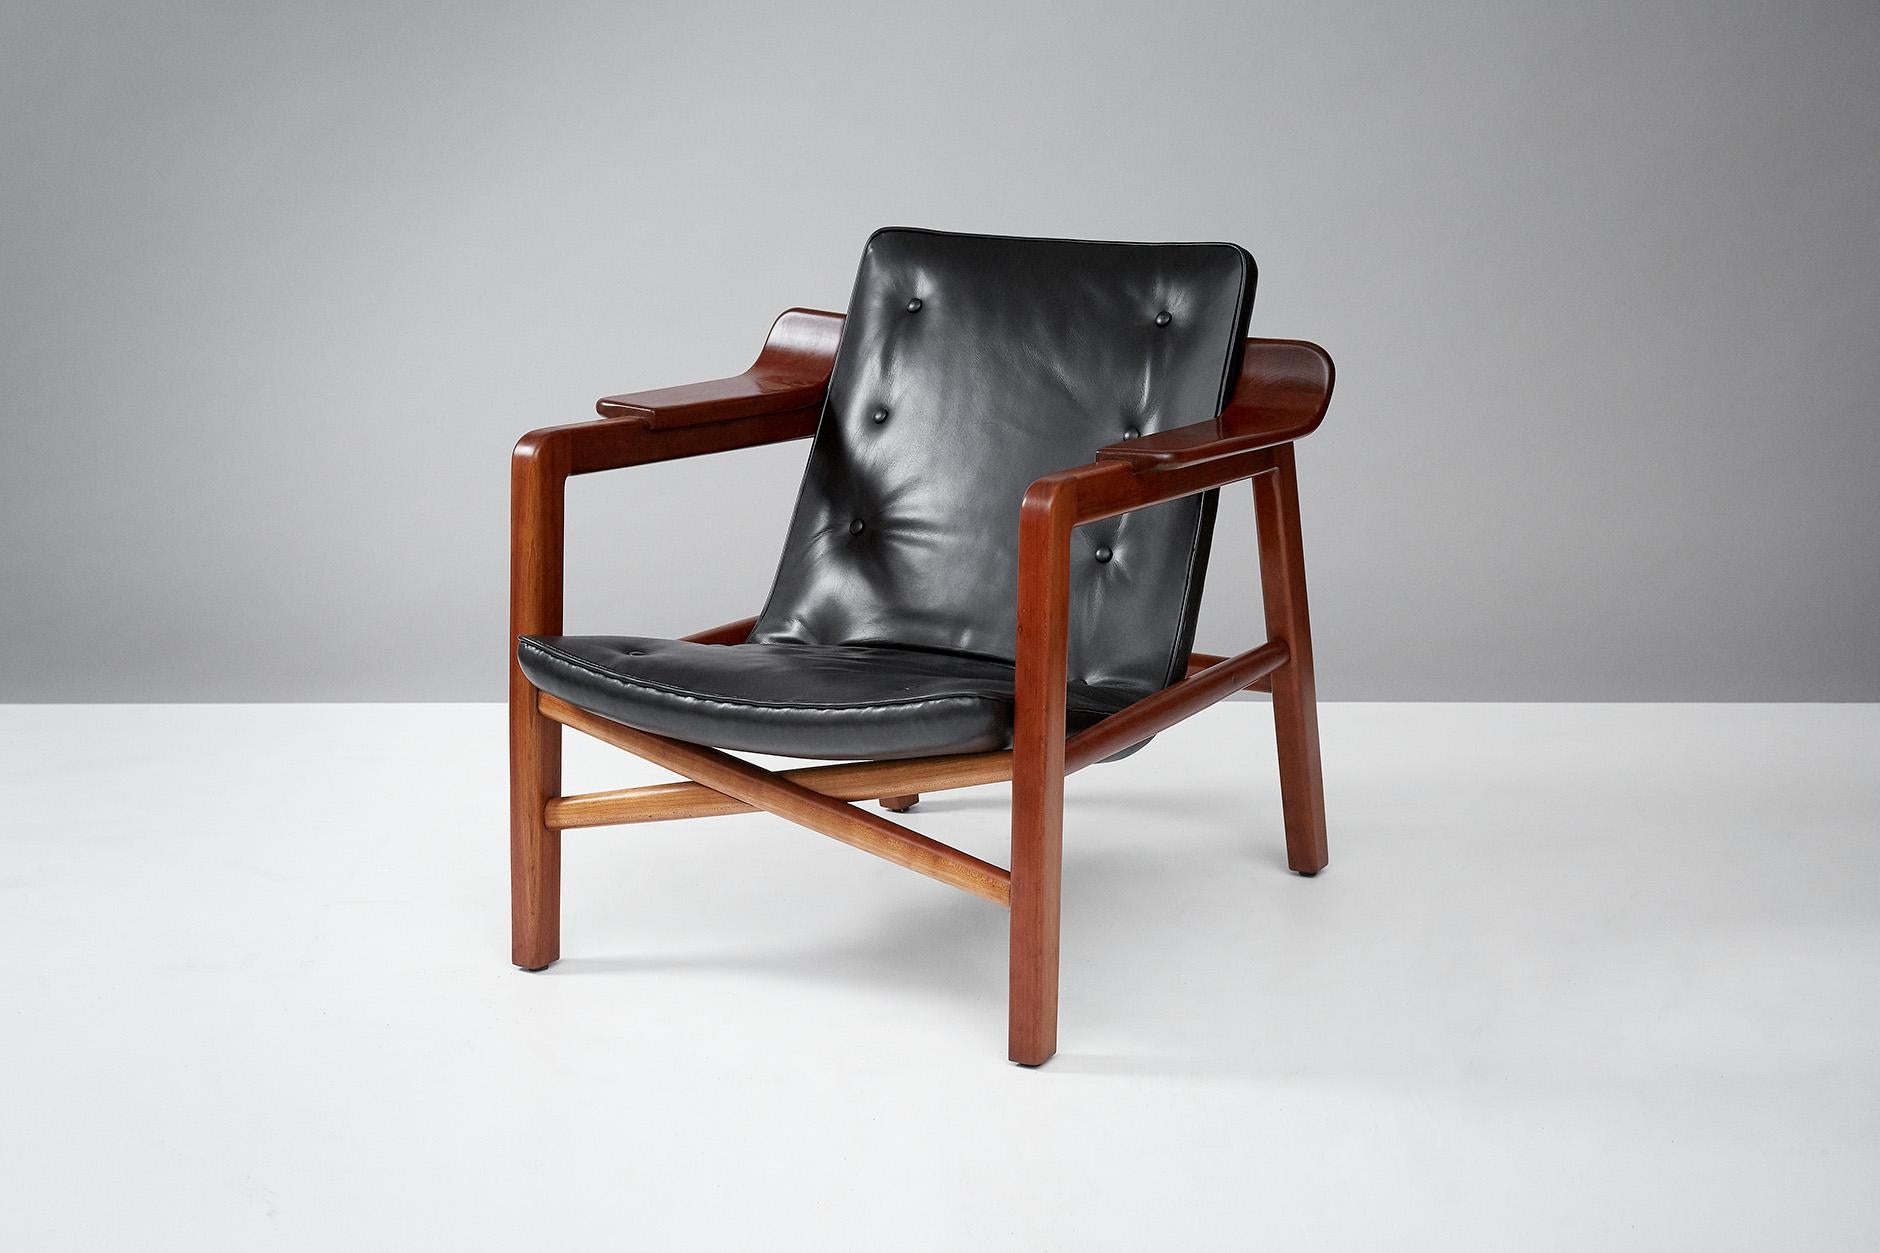 Edvard & Tove Kindt-Larsen

Fireplace Chair, c1939

Cherry wood armchair produced by Gustav Bertelsen, Denmark. Floating seat upholstered in black leather.

The Fireplace chair was the first piece of its kind to separate the upholstered seat